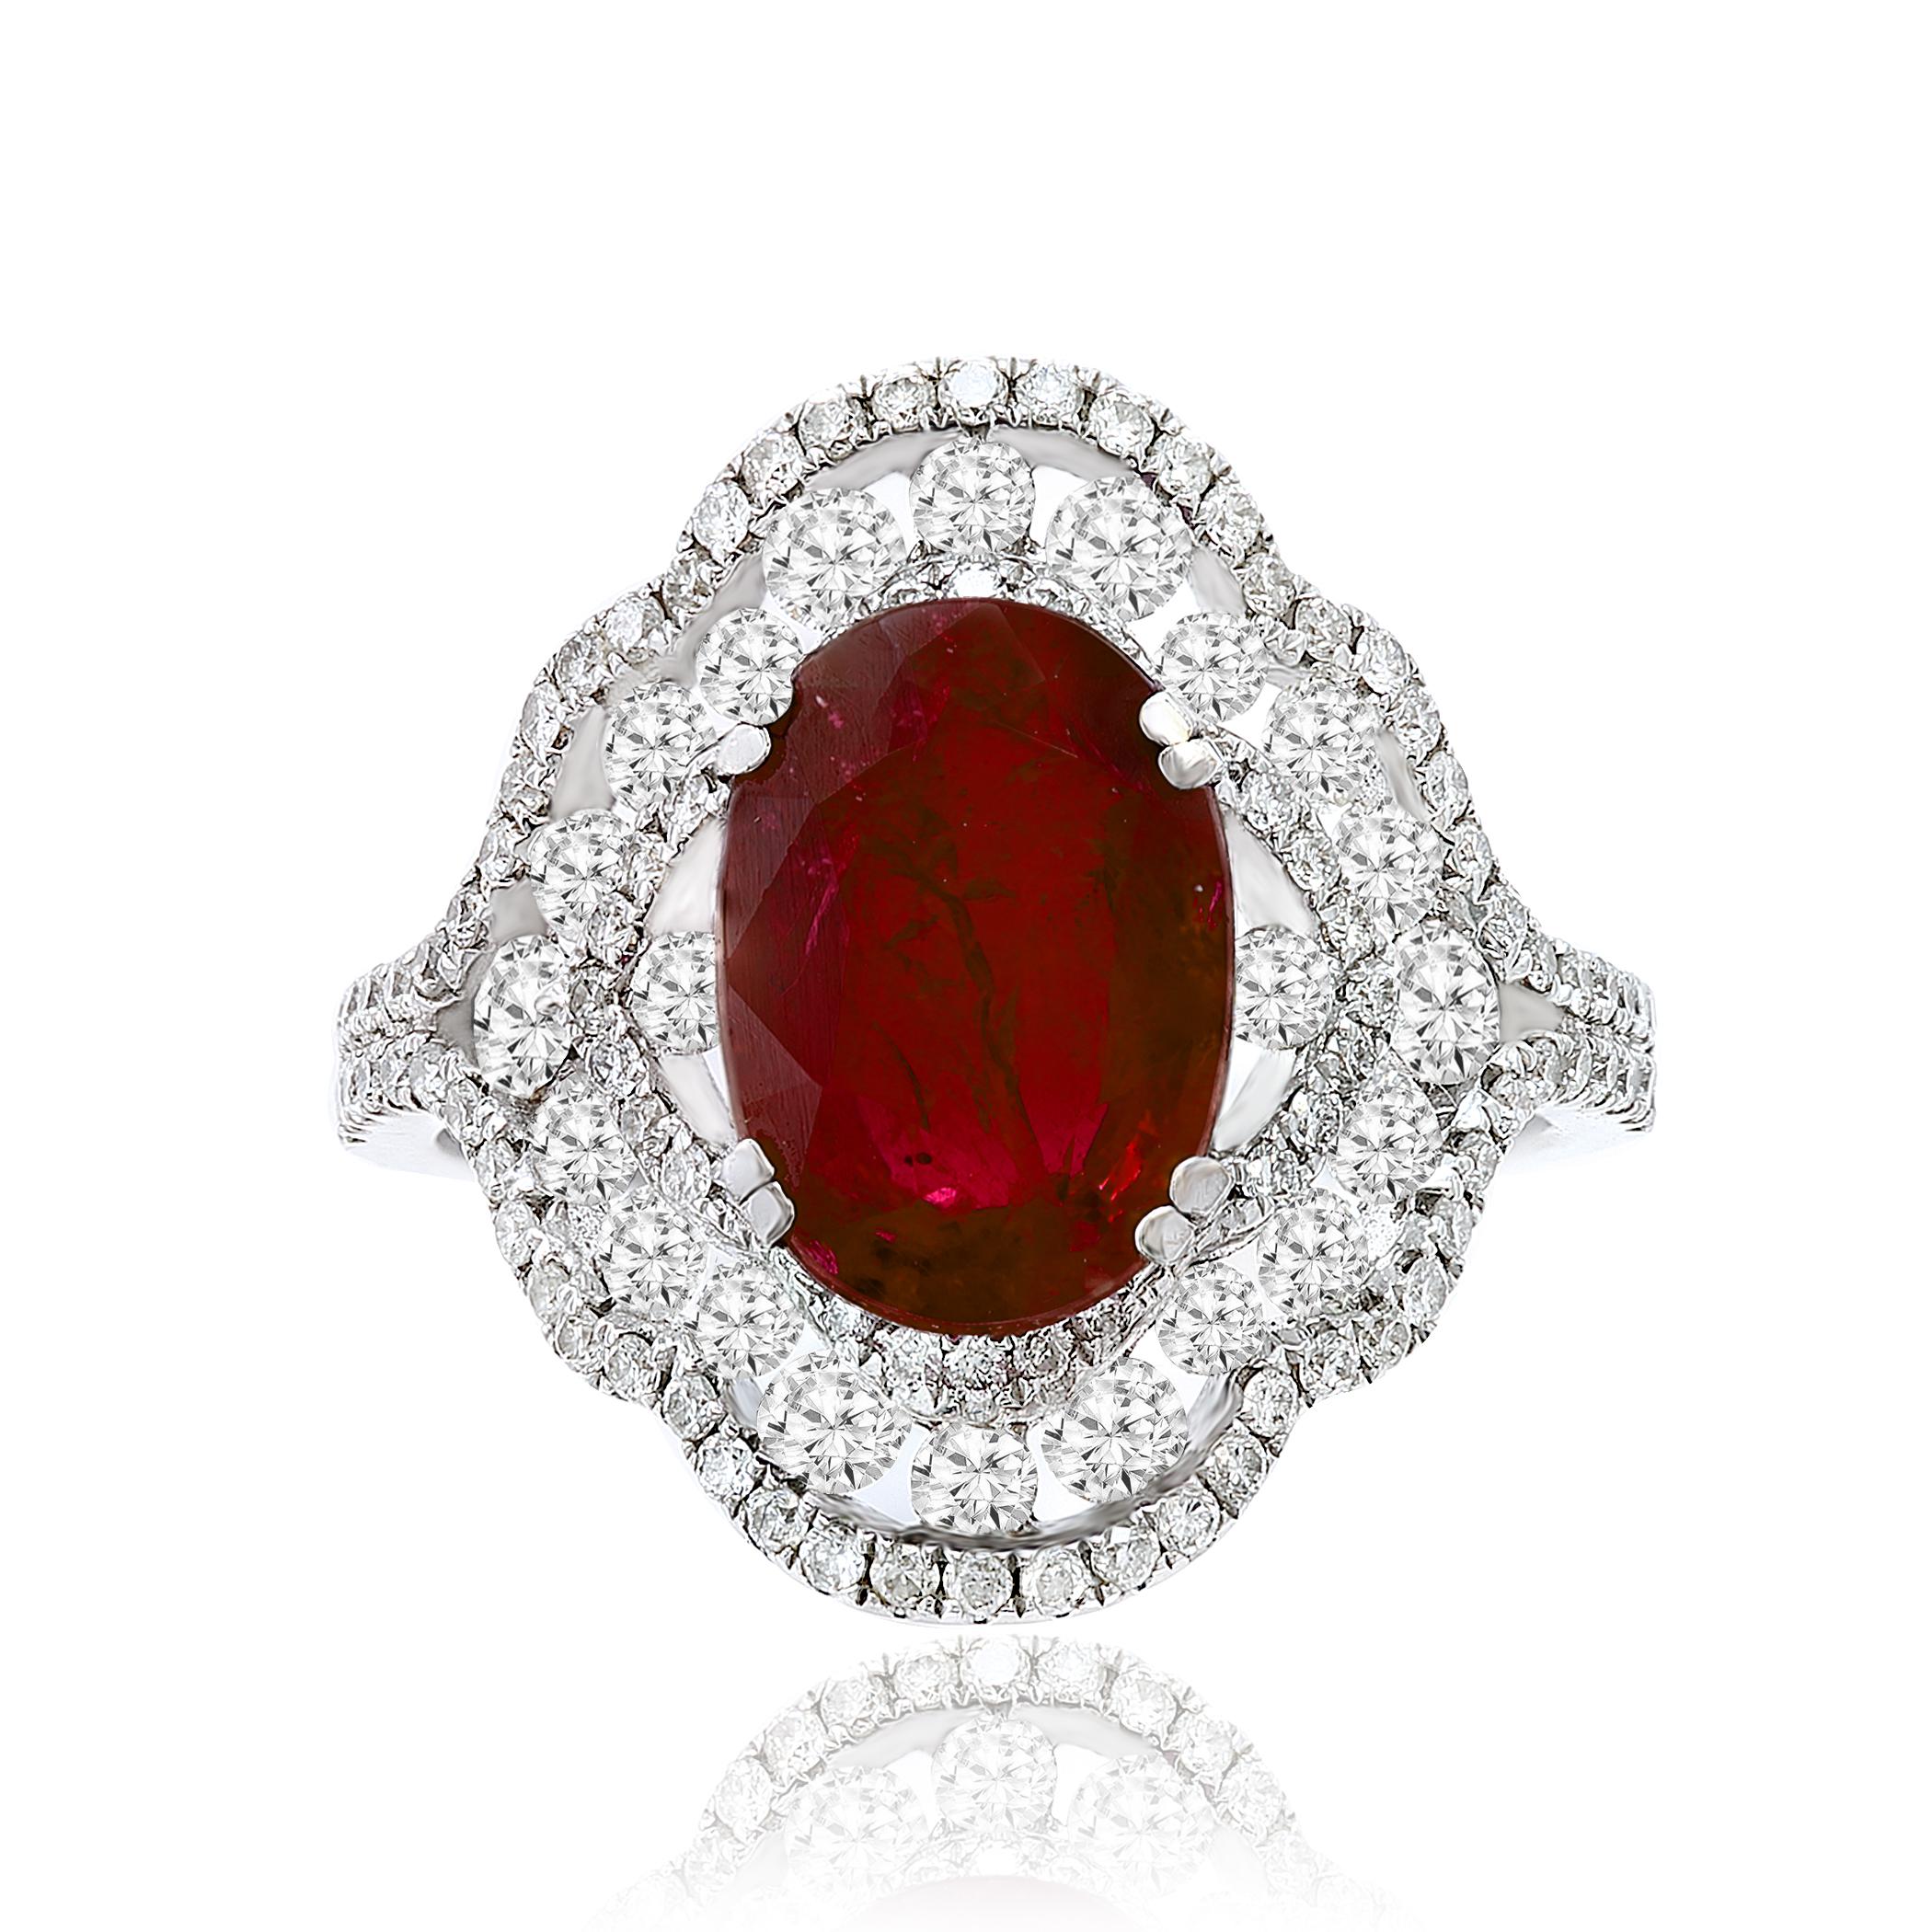 A stylish cocktail ring showcasing a 3.06 carat color-rich ruby, surrounded by rows of round brilliant diamonds. Flanked on either side by a round brilliant diamond. Diamonds weigh 1.26 carats total. Made in 18k white gold.

Size 6.5 US (Sizable).